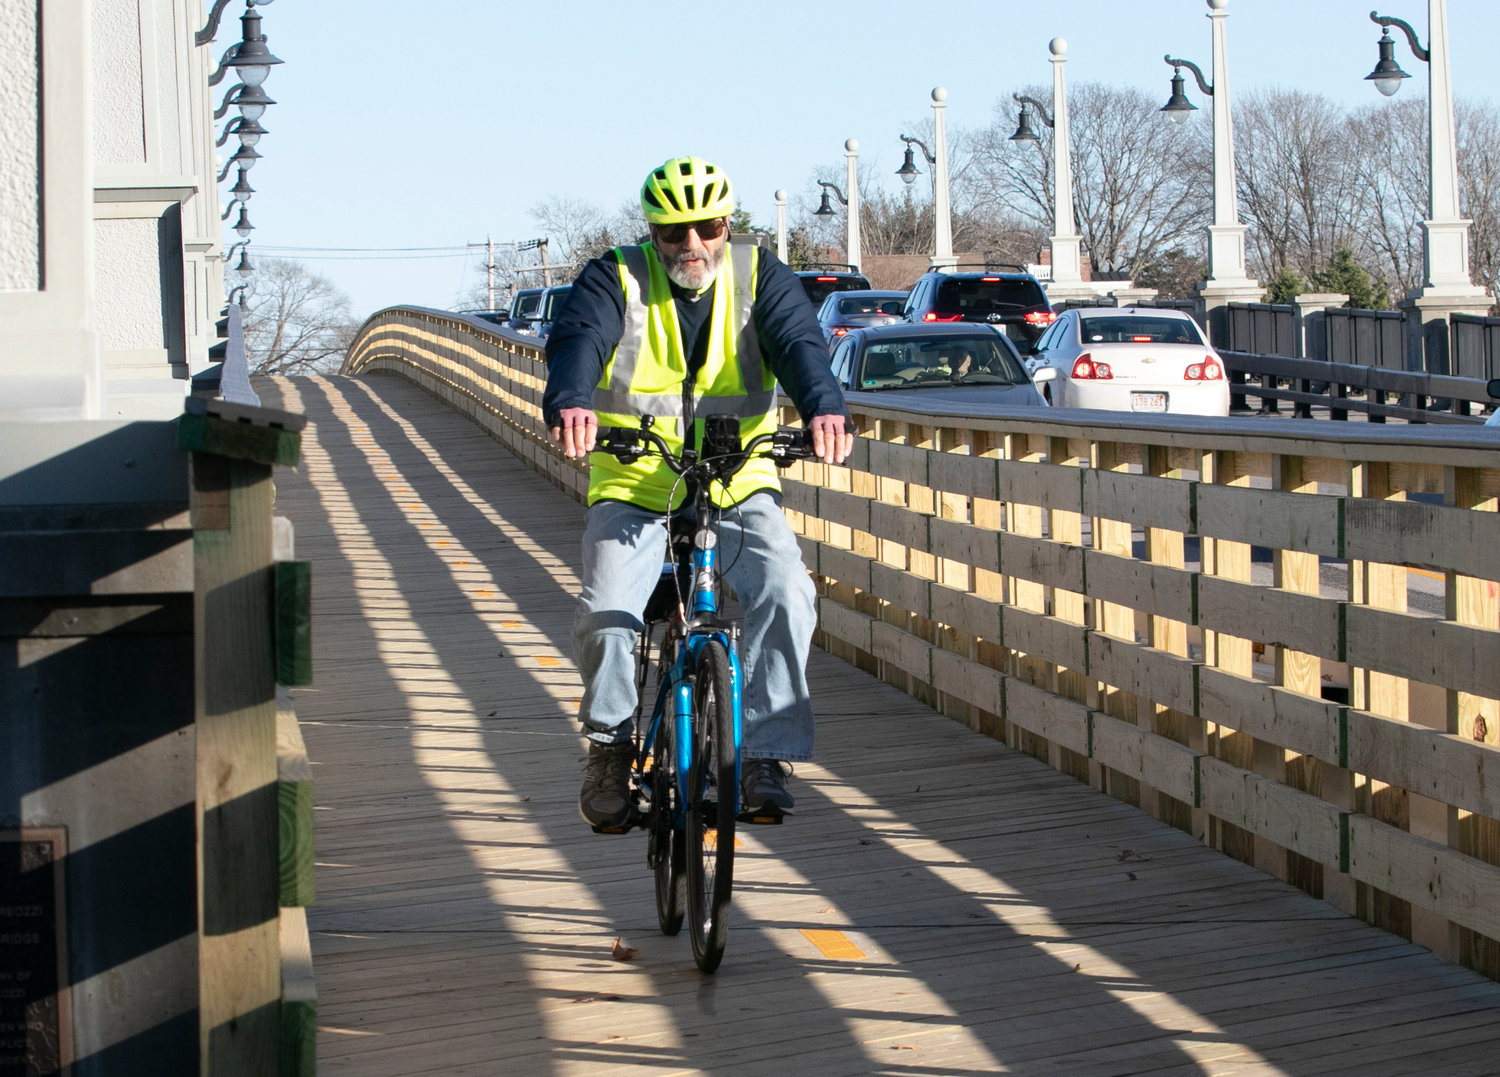 John Vinnitti, of Riverside, rides down the newly built wooden boardwalk on the Barrington River Bridge after a trip to Bristol and back. Once on the other side he said that, "It feels comfortable on the bridge. Wide and safe. They did a nice job."